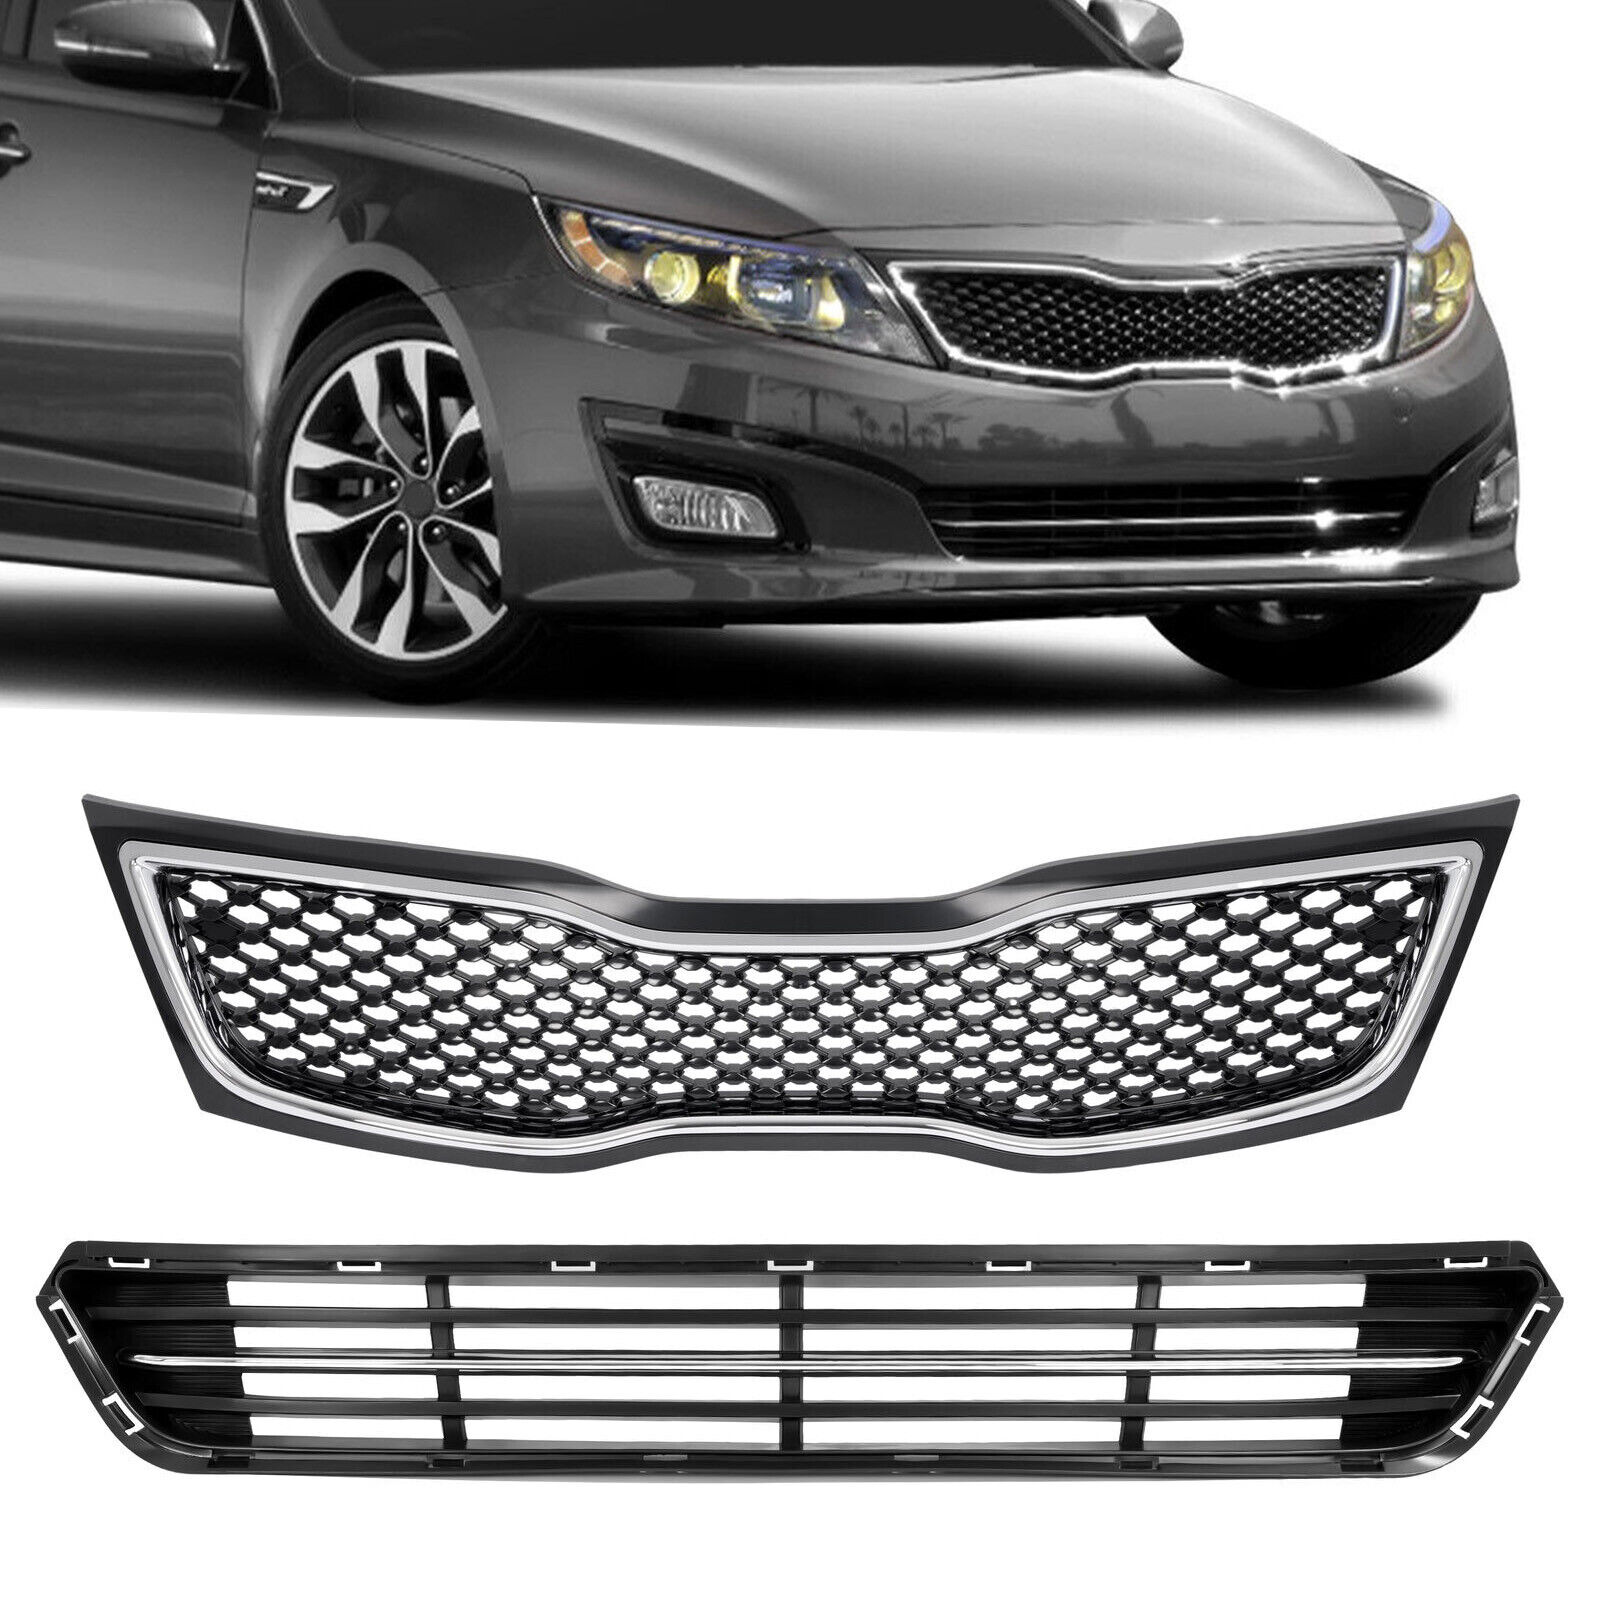 2Pcs Set Of Front Upper & Lower Bumper Grille Grill For Kia Optima 2014 2015